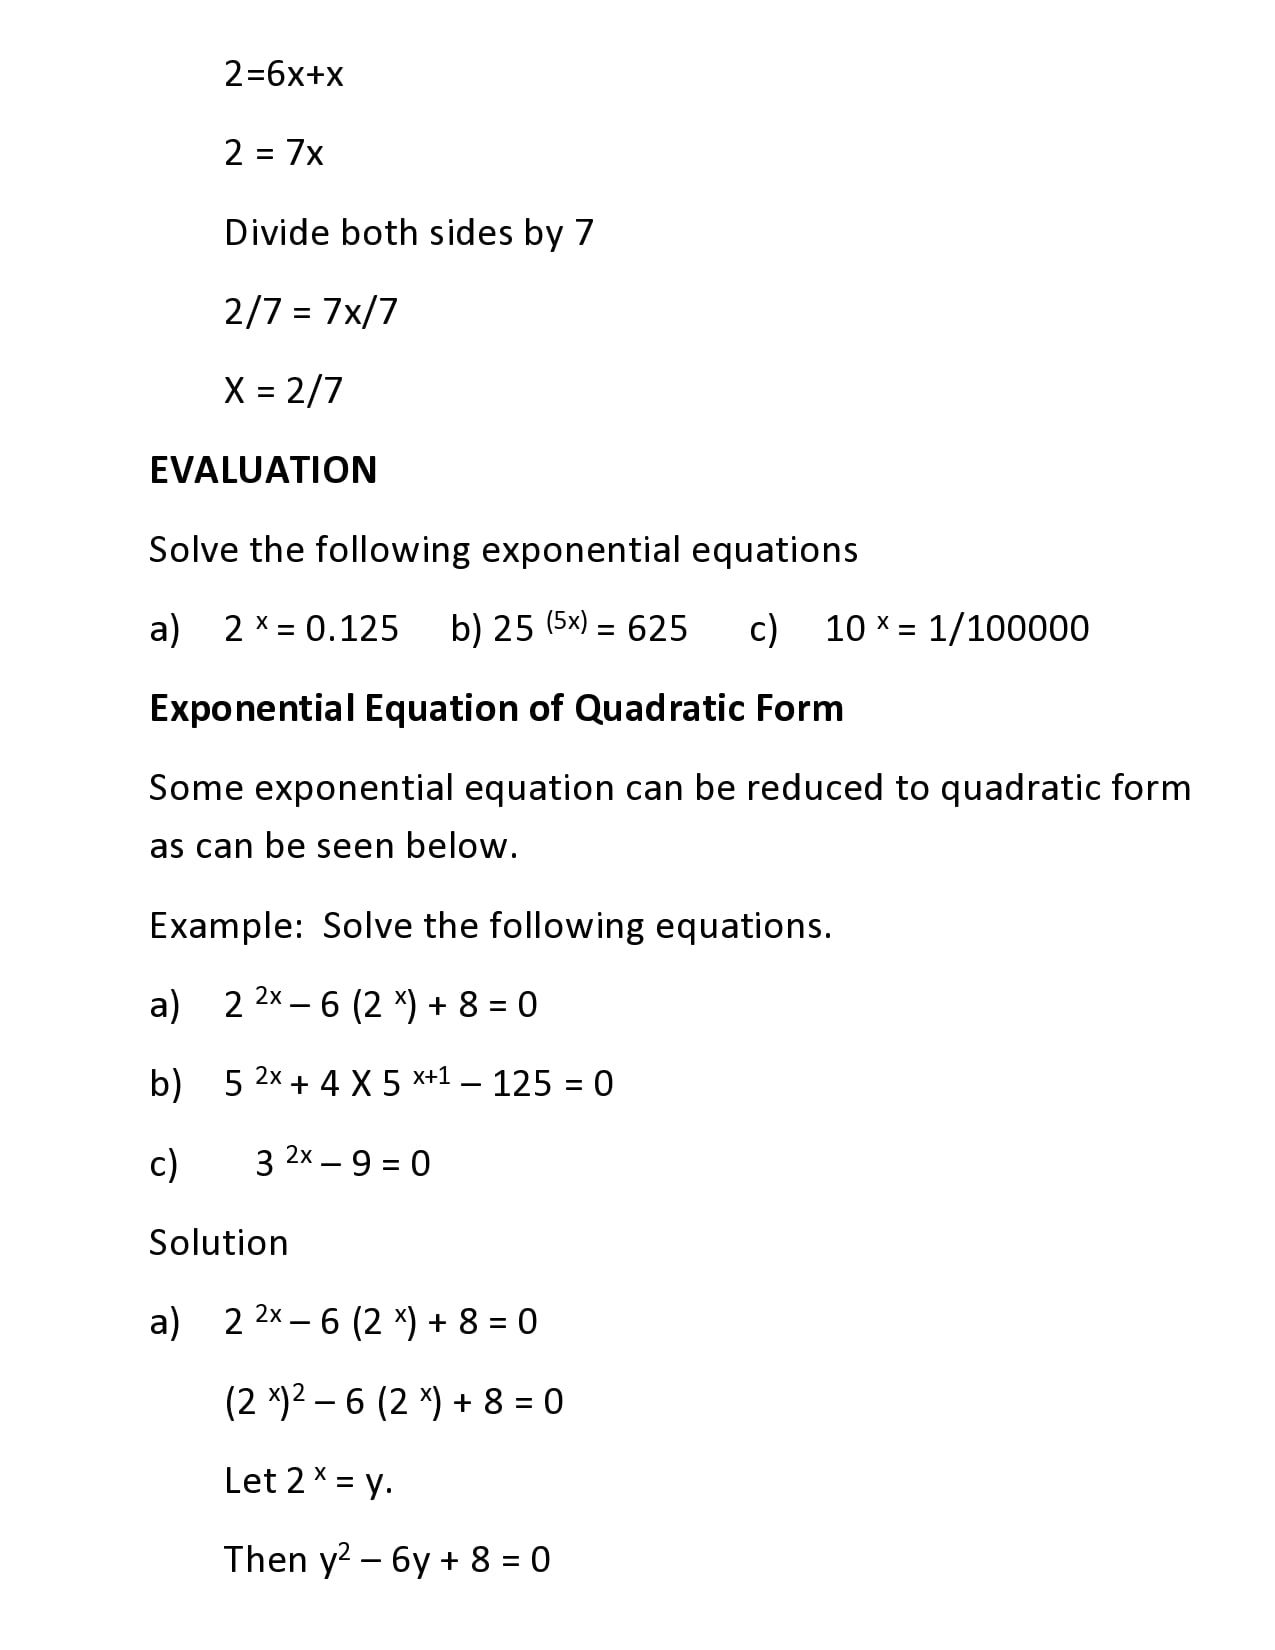 INDICIAL/EXPONENTIAL EQUATION3